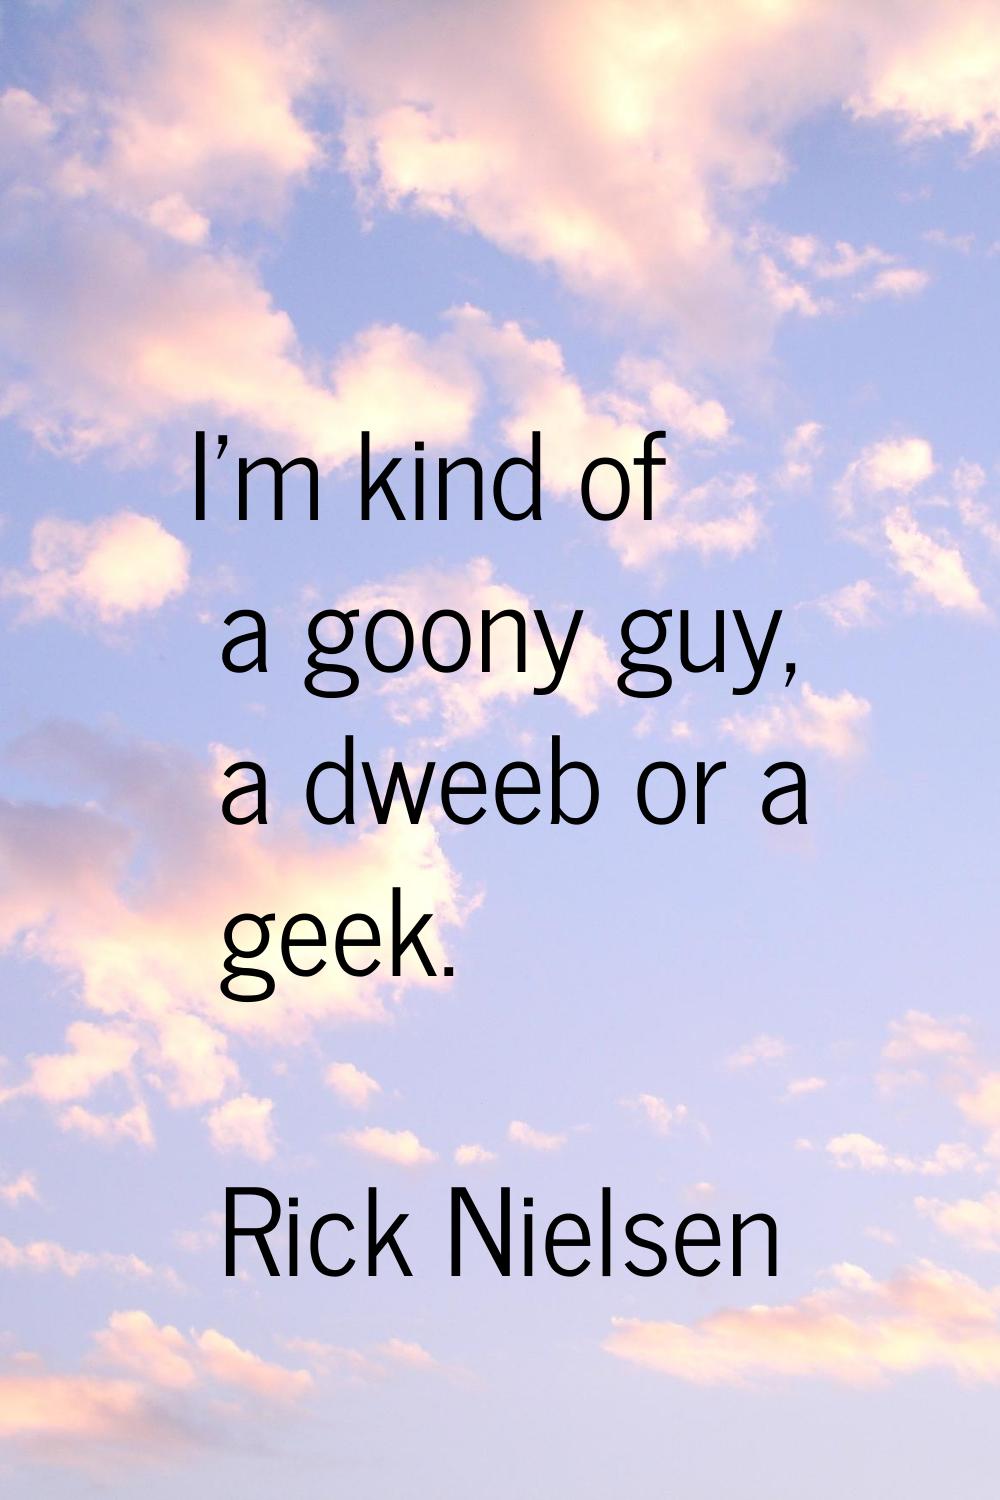 I'm kind of a goony guy, a dweeb or a geek.